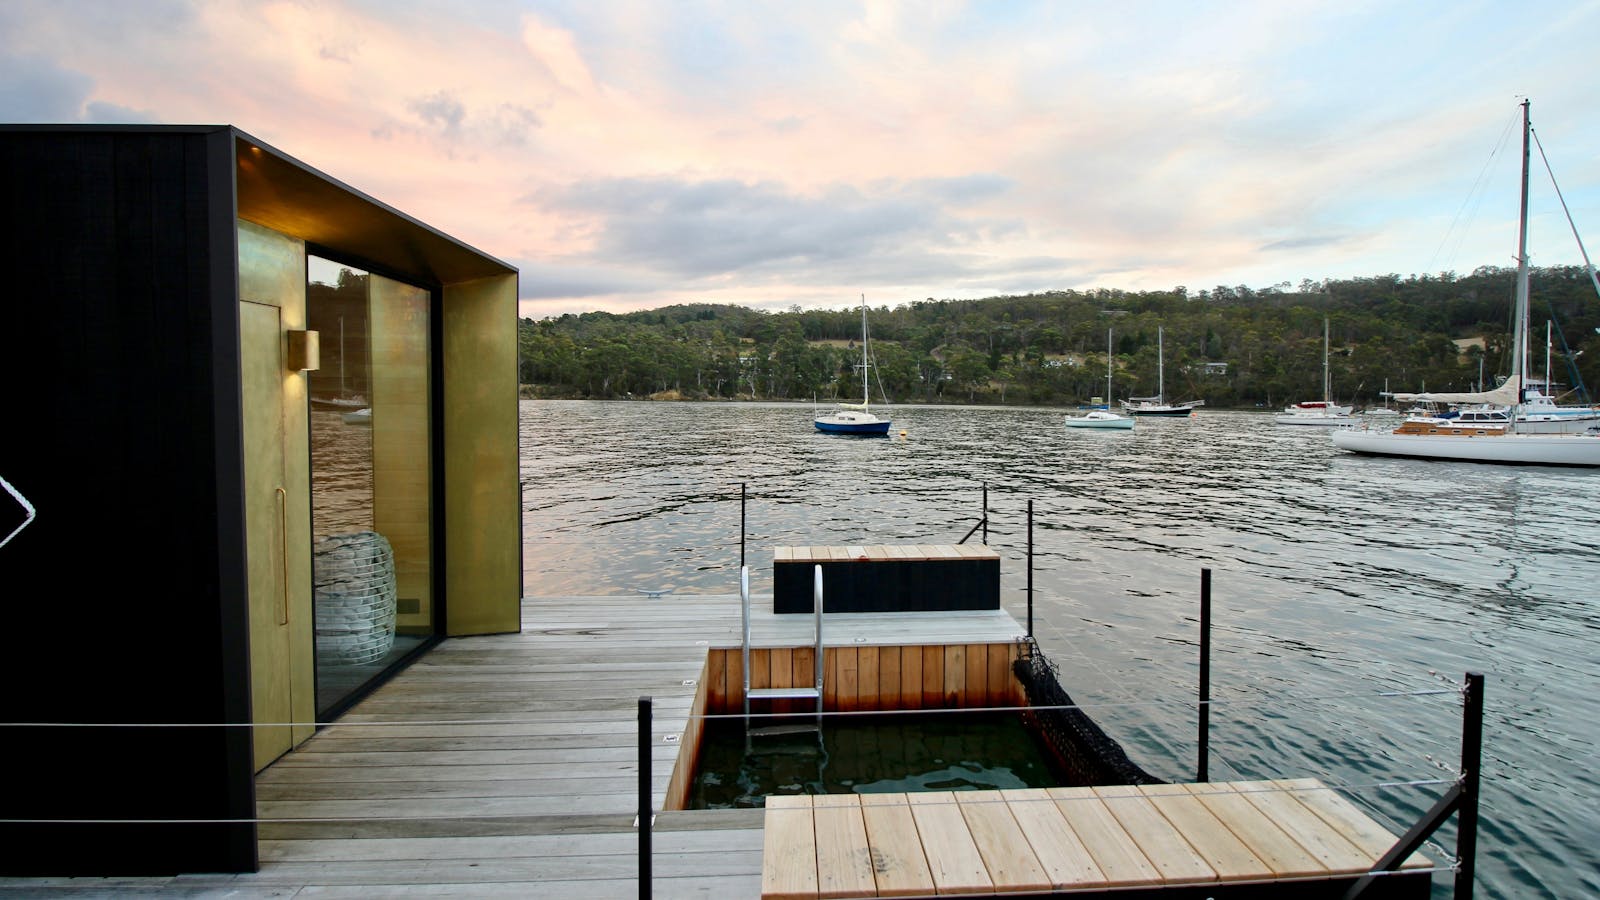 Sauna Boat Tasmania - Overlooking the picturesque Little Oyster Bay